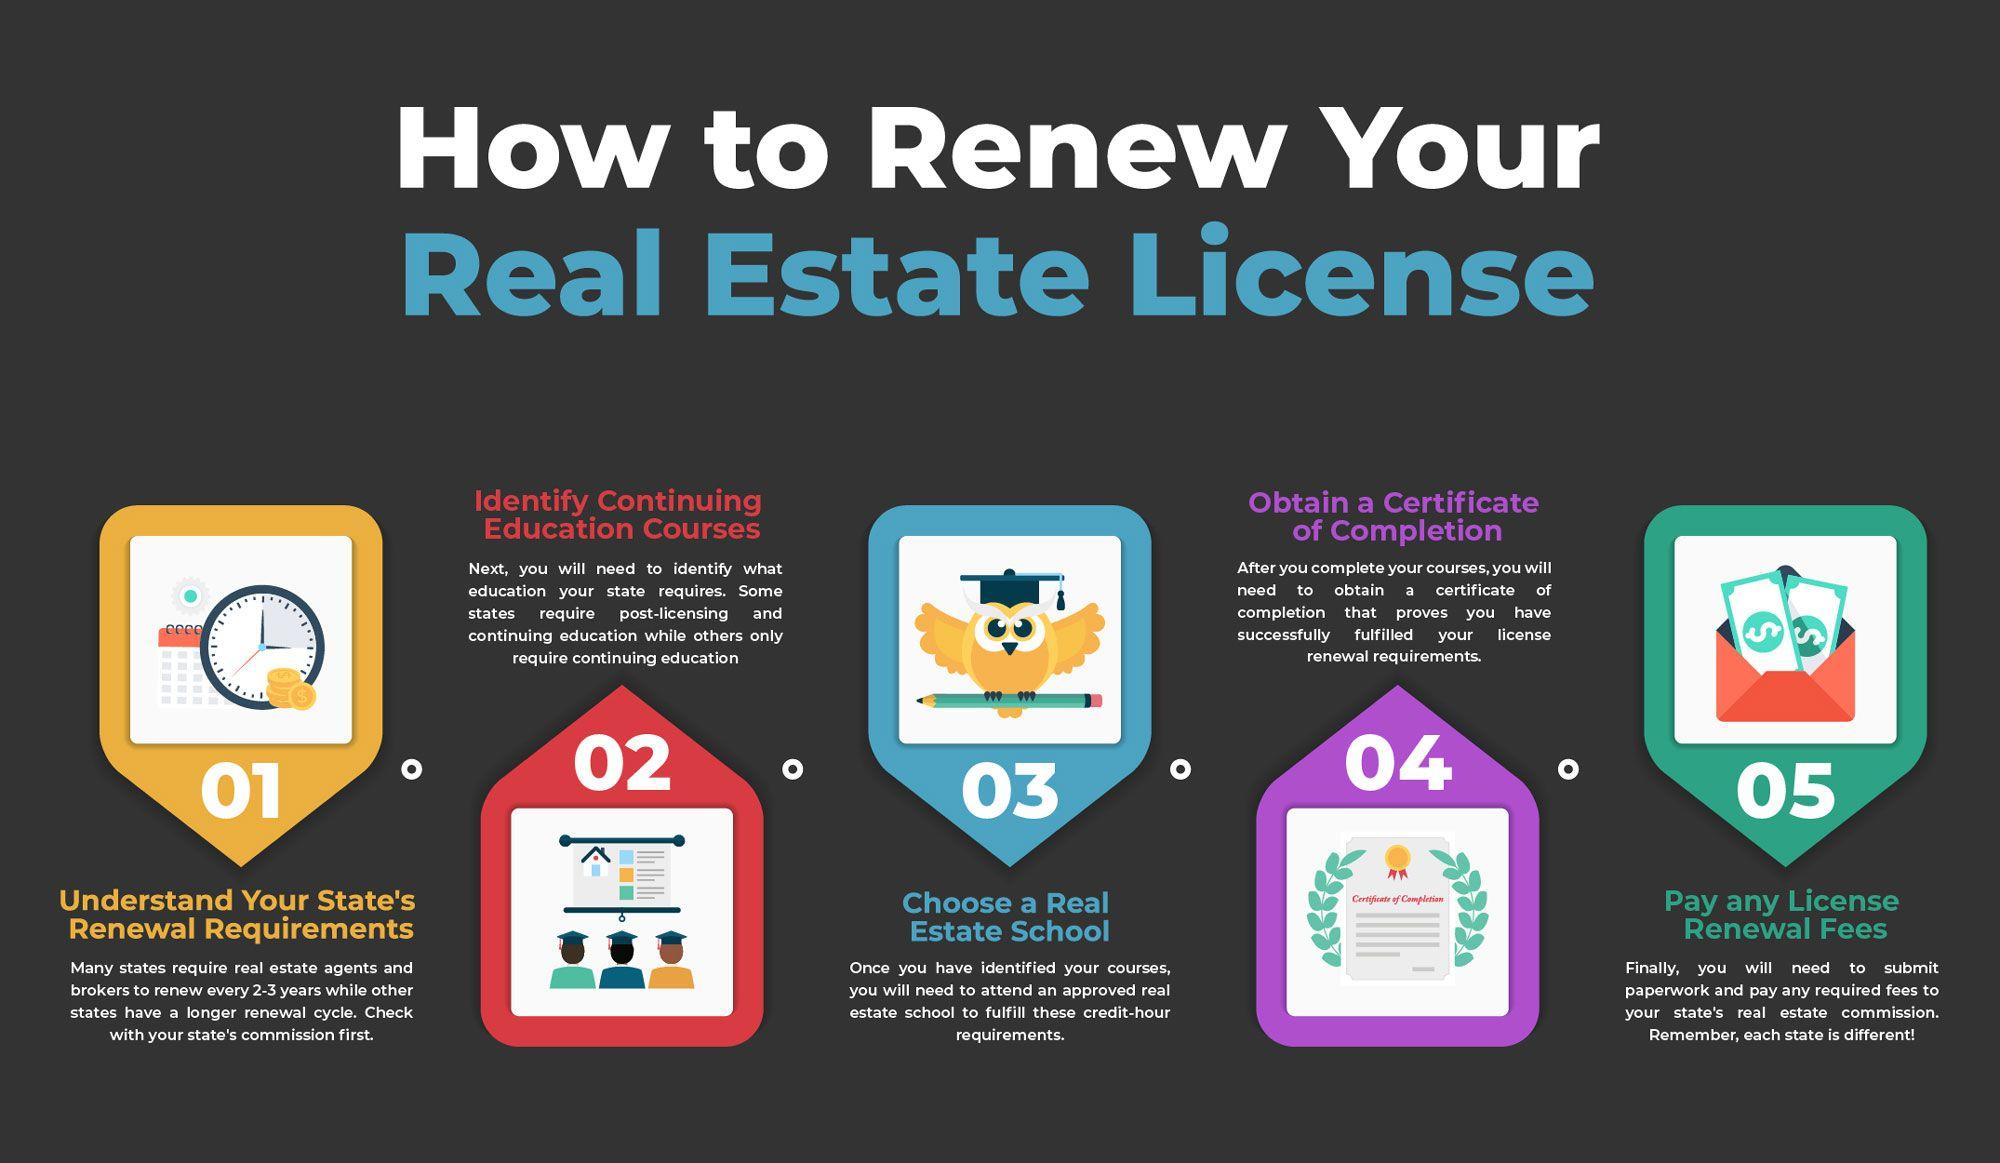 What are the continuing education requirements for real estate licensees